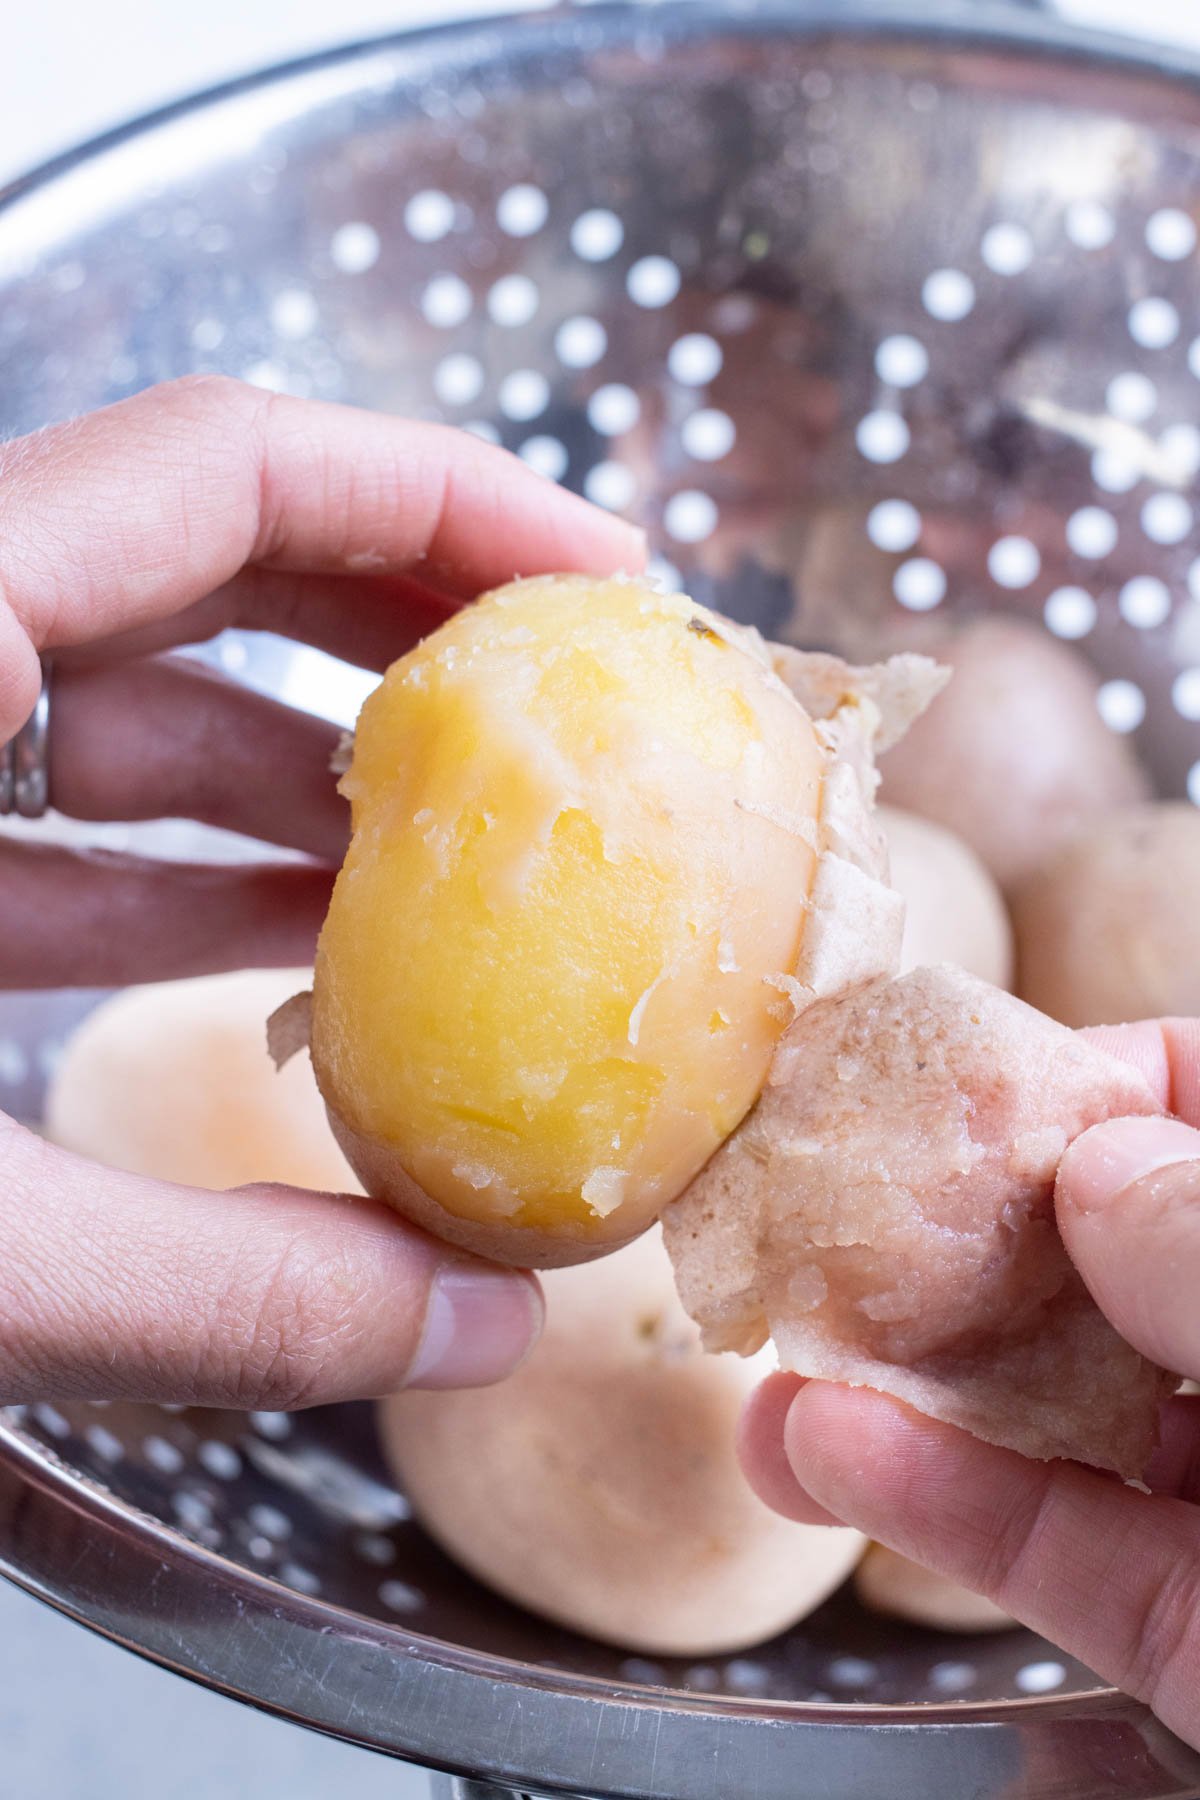 Skin is peeled from potatoes by hand.